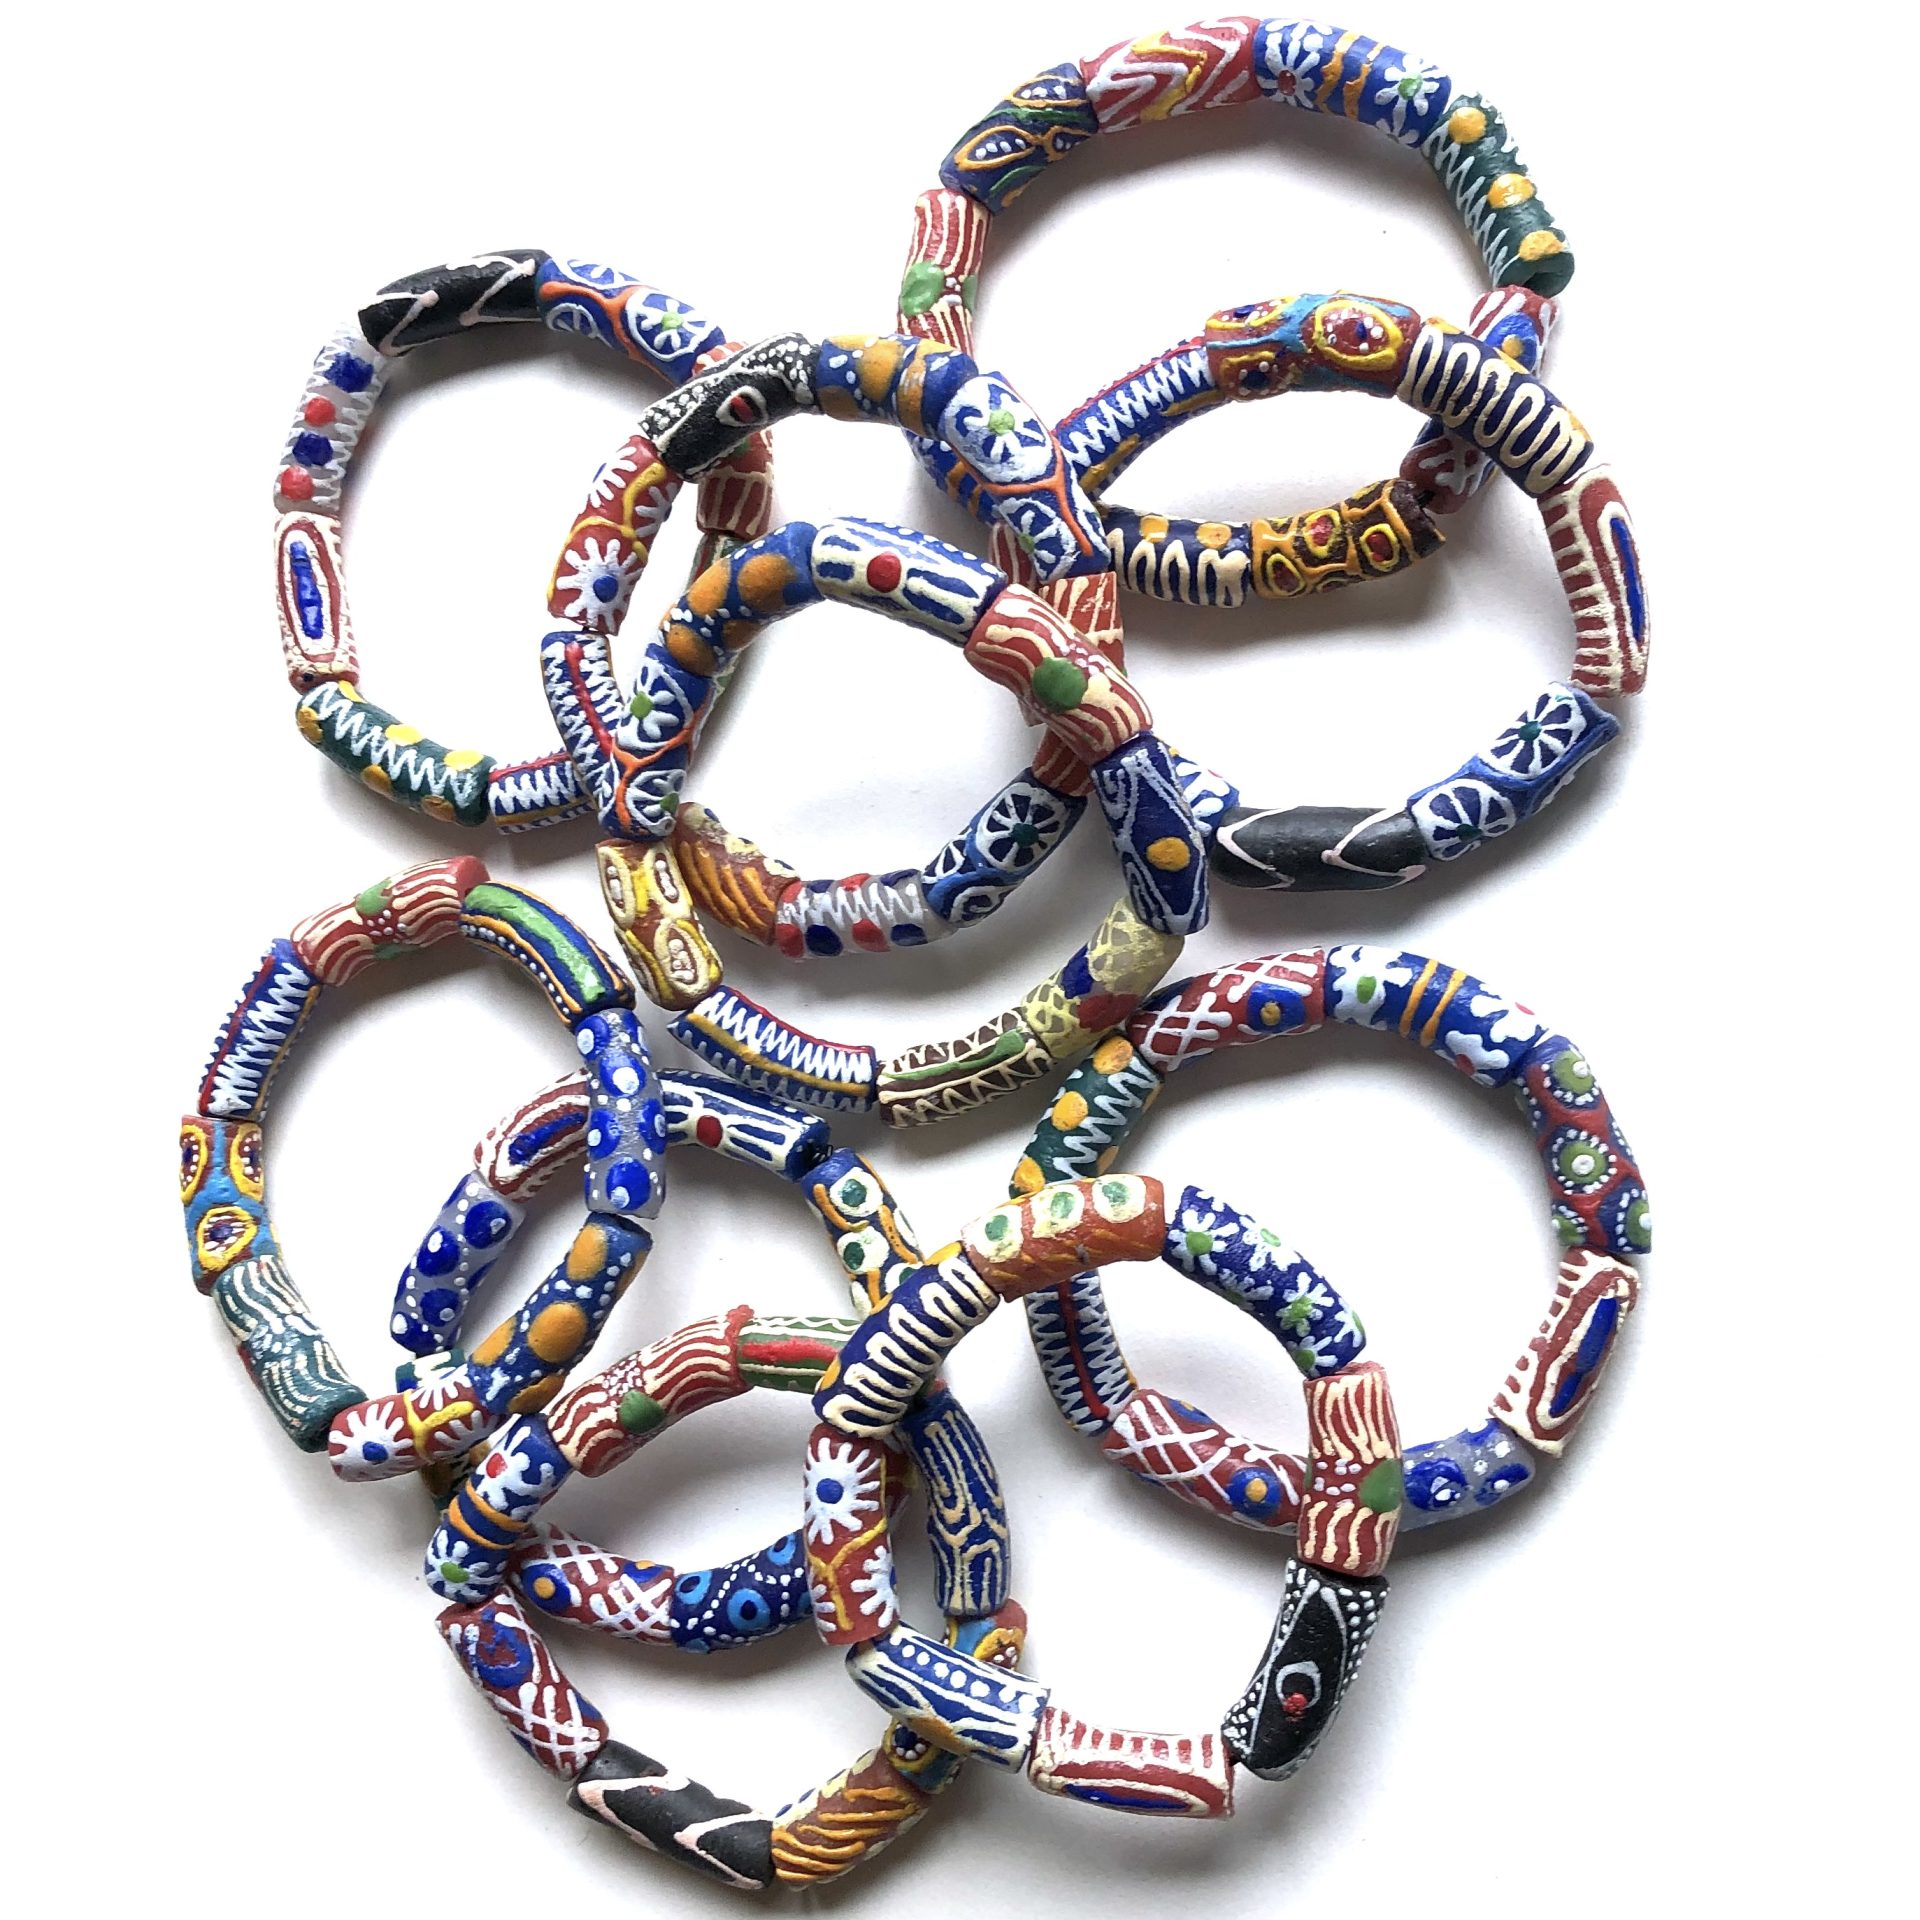 Handpainted Recycled Glass Beads Bracelet